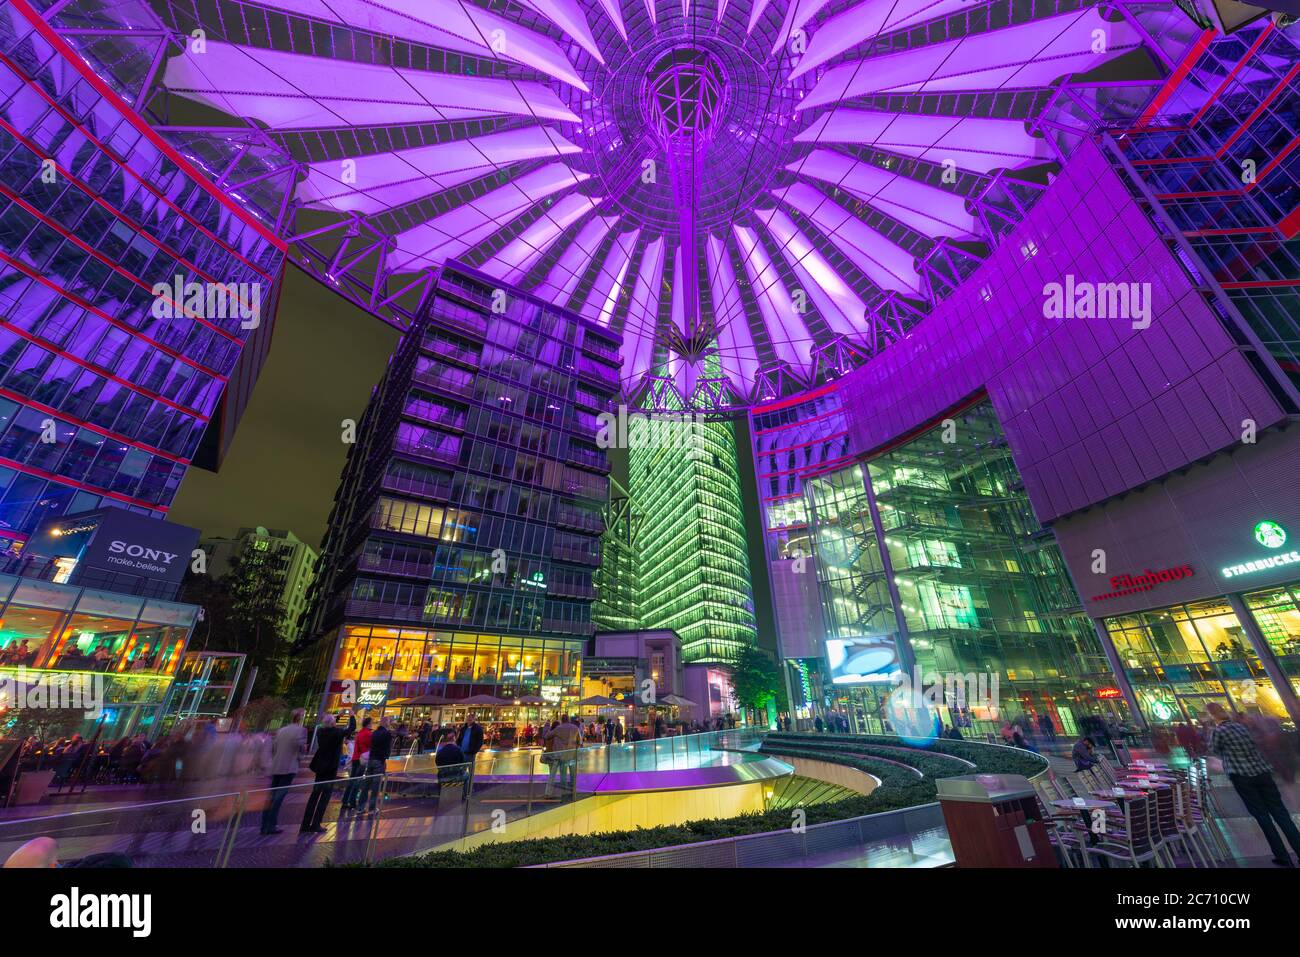 BERLIN - SEPTEMBER 20: Sony Center September 20, 2013 in Berlin, Germany. The center is a public space located in the Potsdamer Platz financial distri Stock Photo